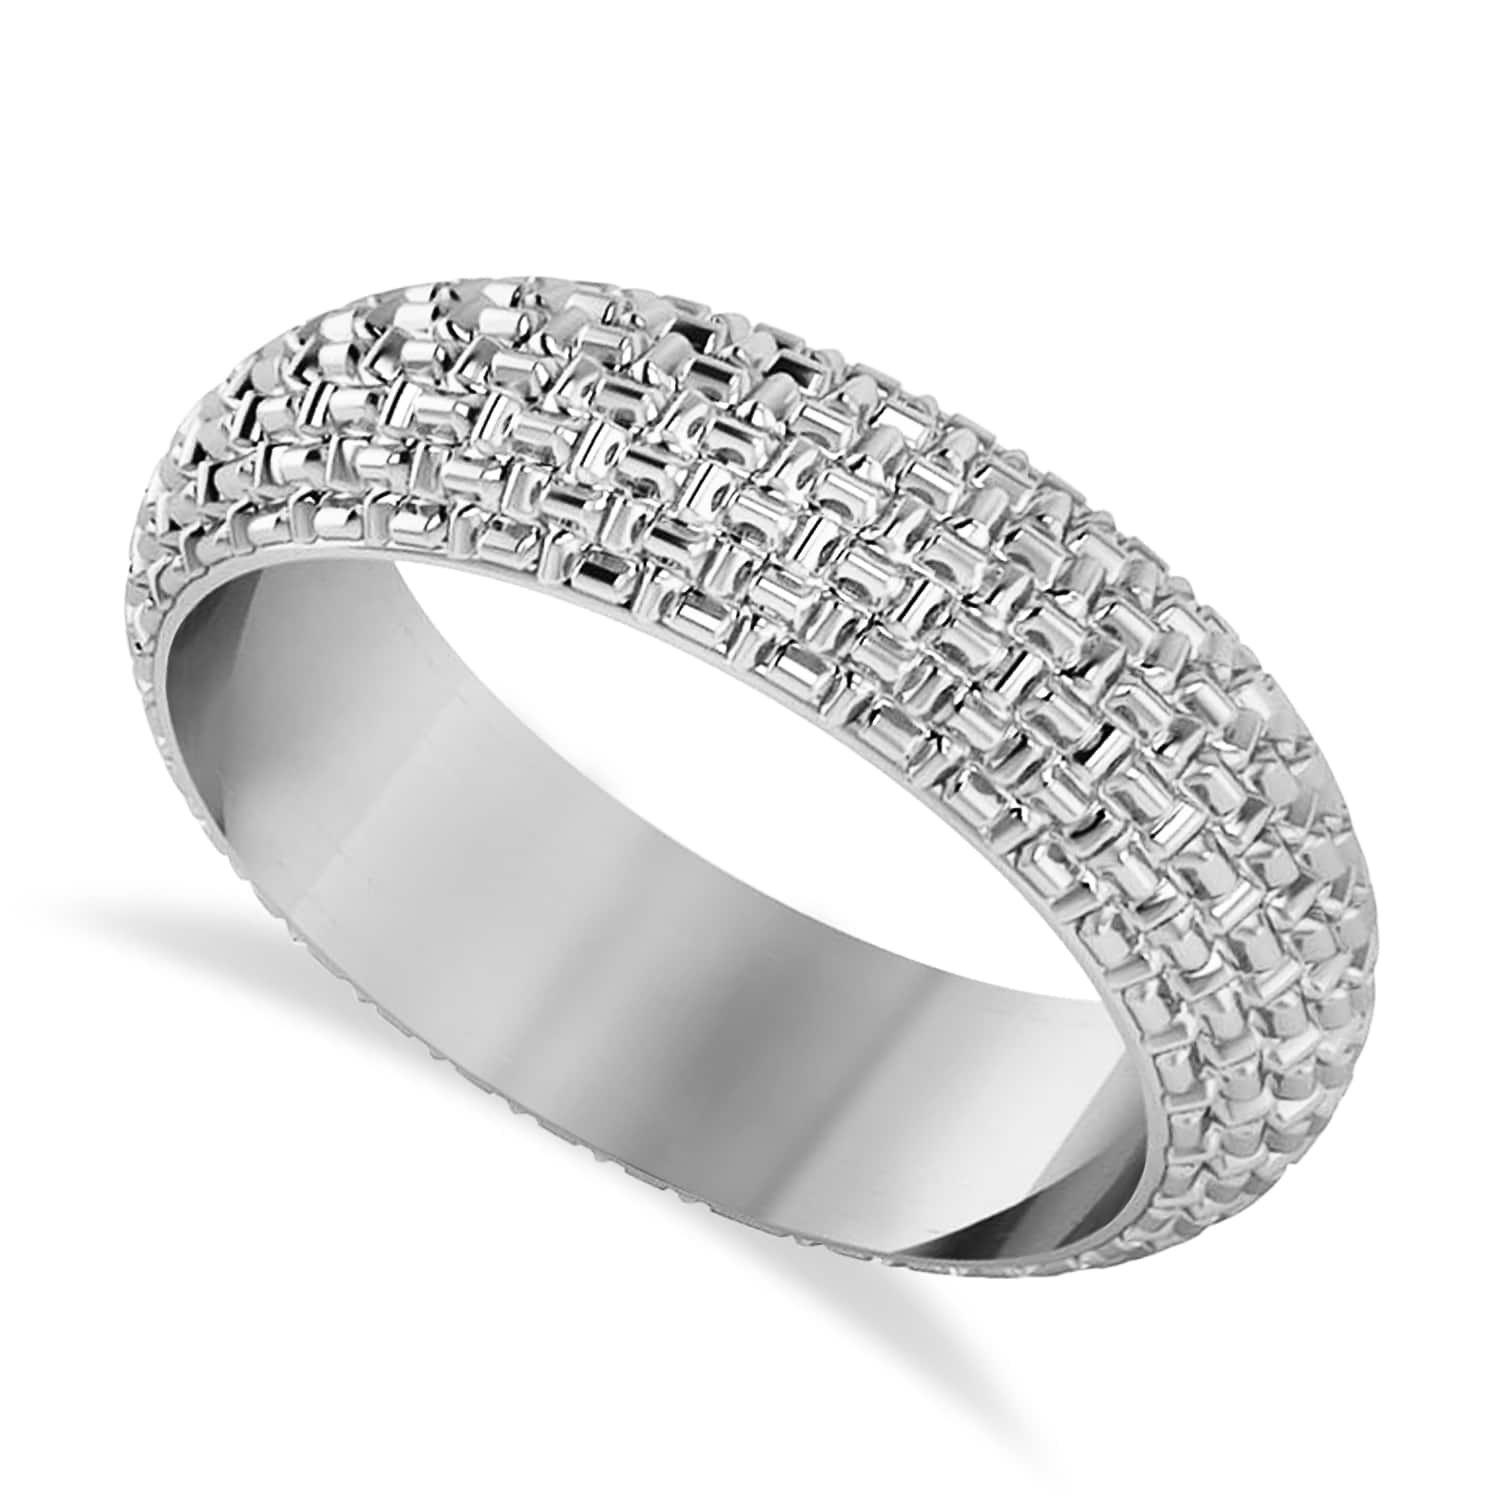 Laced Textured Men's Wedding Ring Band 14k White Gold